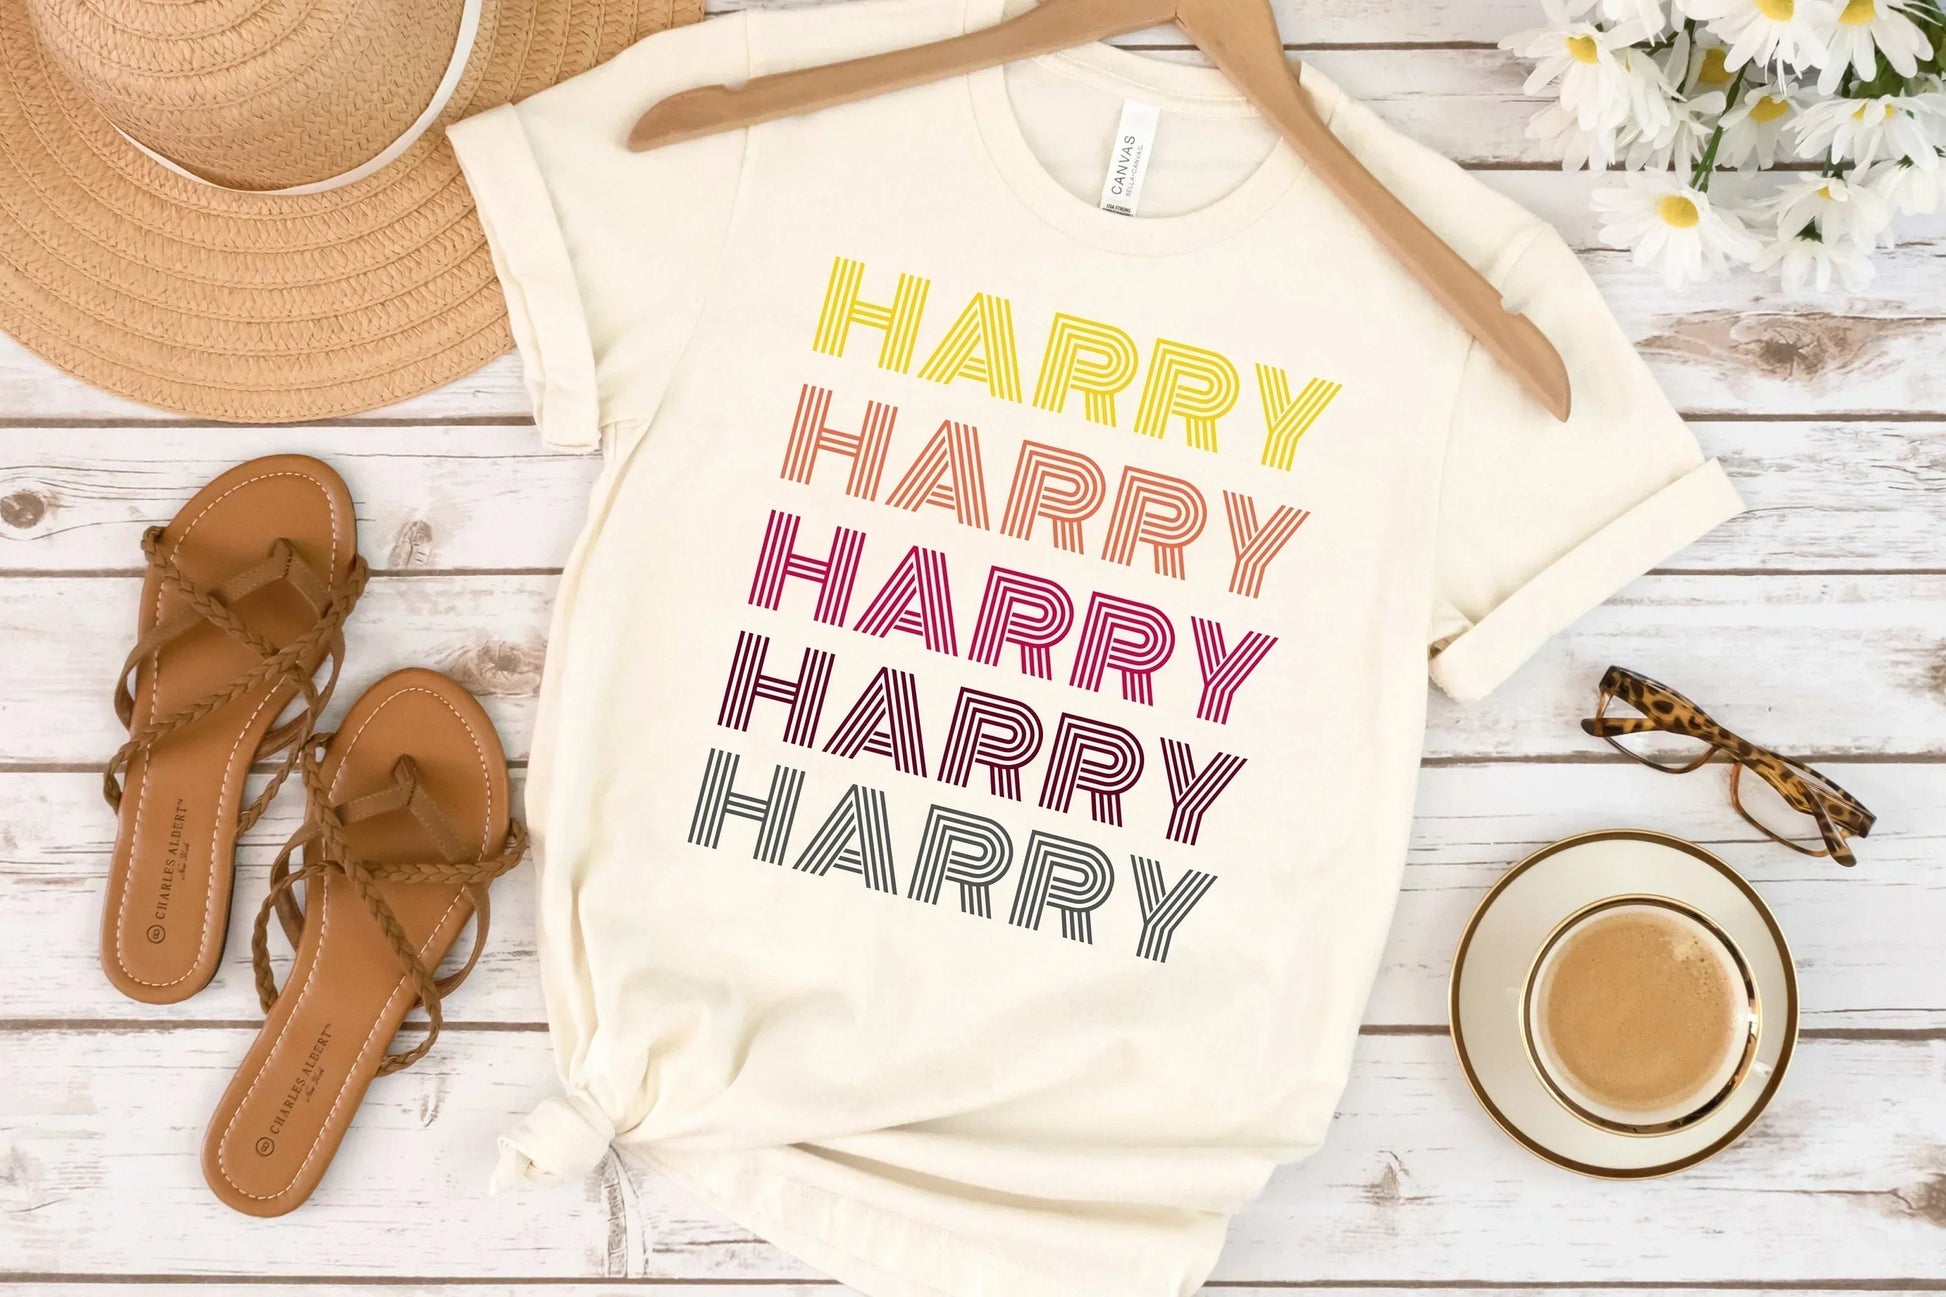 Retro Harry Shirt, Treat People With Kindness, Harry Styles Shirt, Fine Line Shirt, Kindness Sweatshirt for Women, One Direction Hoodie